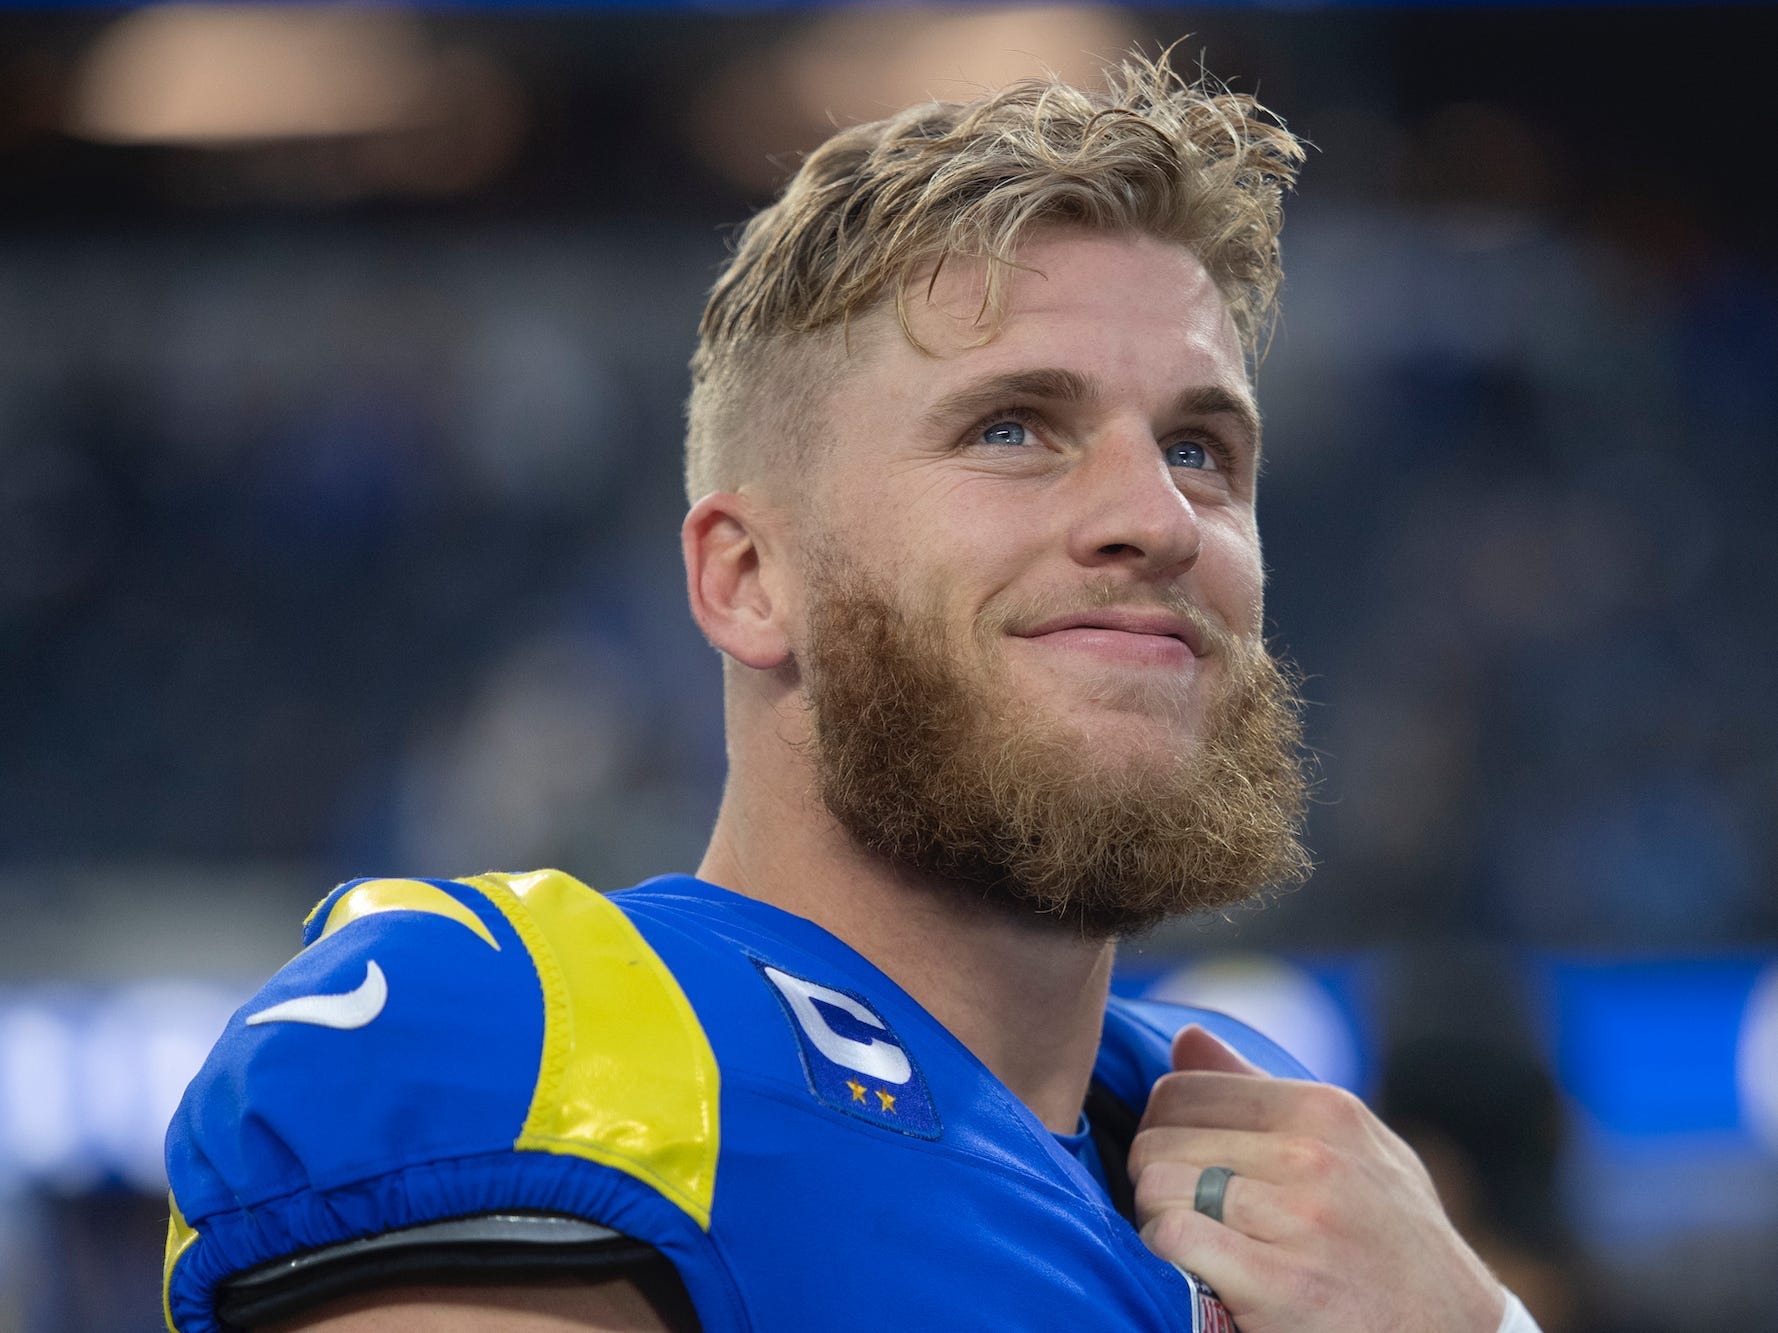 Cooper Kupp looks up and smiles.